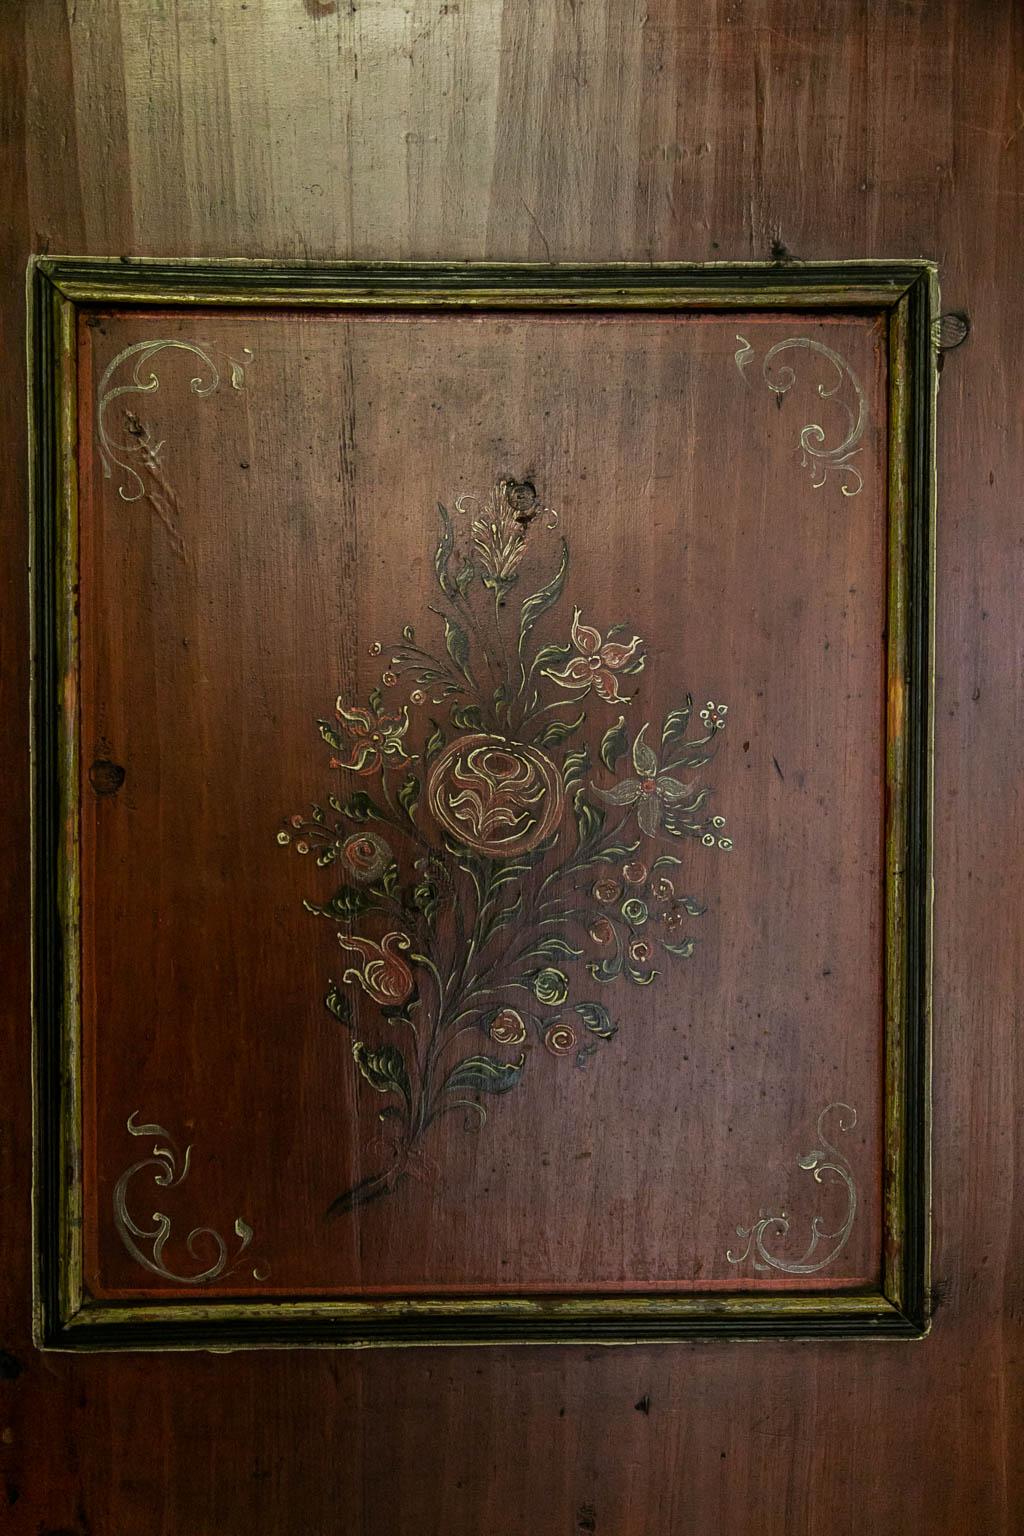 The door of this armoire has two molded panels with floral painted decoration. The steel keyhole escutcheon is original. The interior has four fixed shelves.